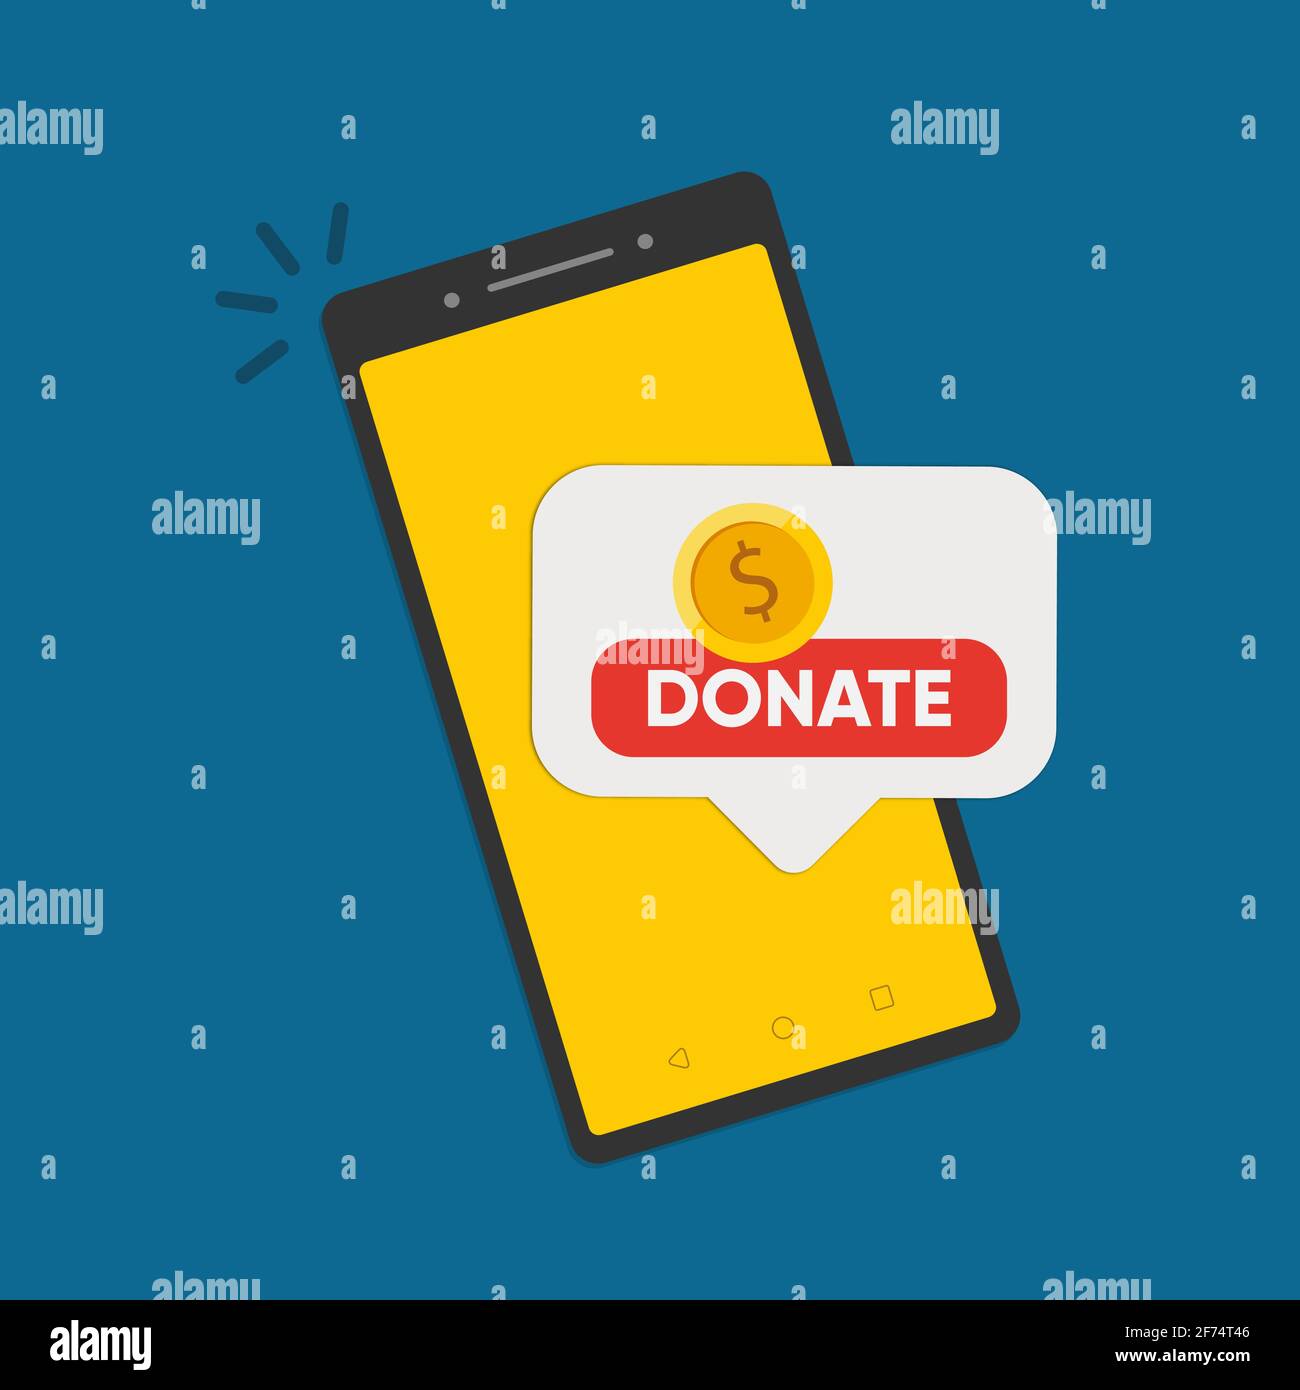 Smartphone with gold coin and button on screen. Donate online concept.  Stock Vector